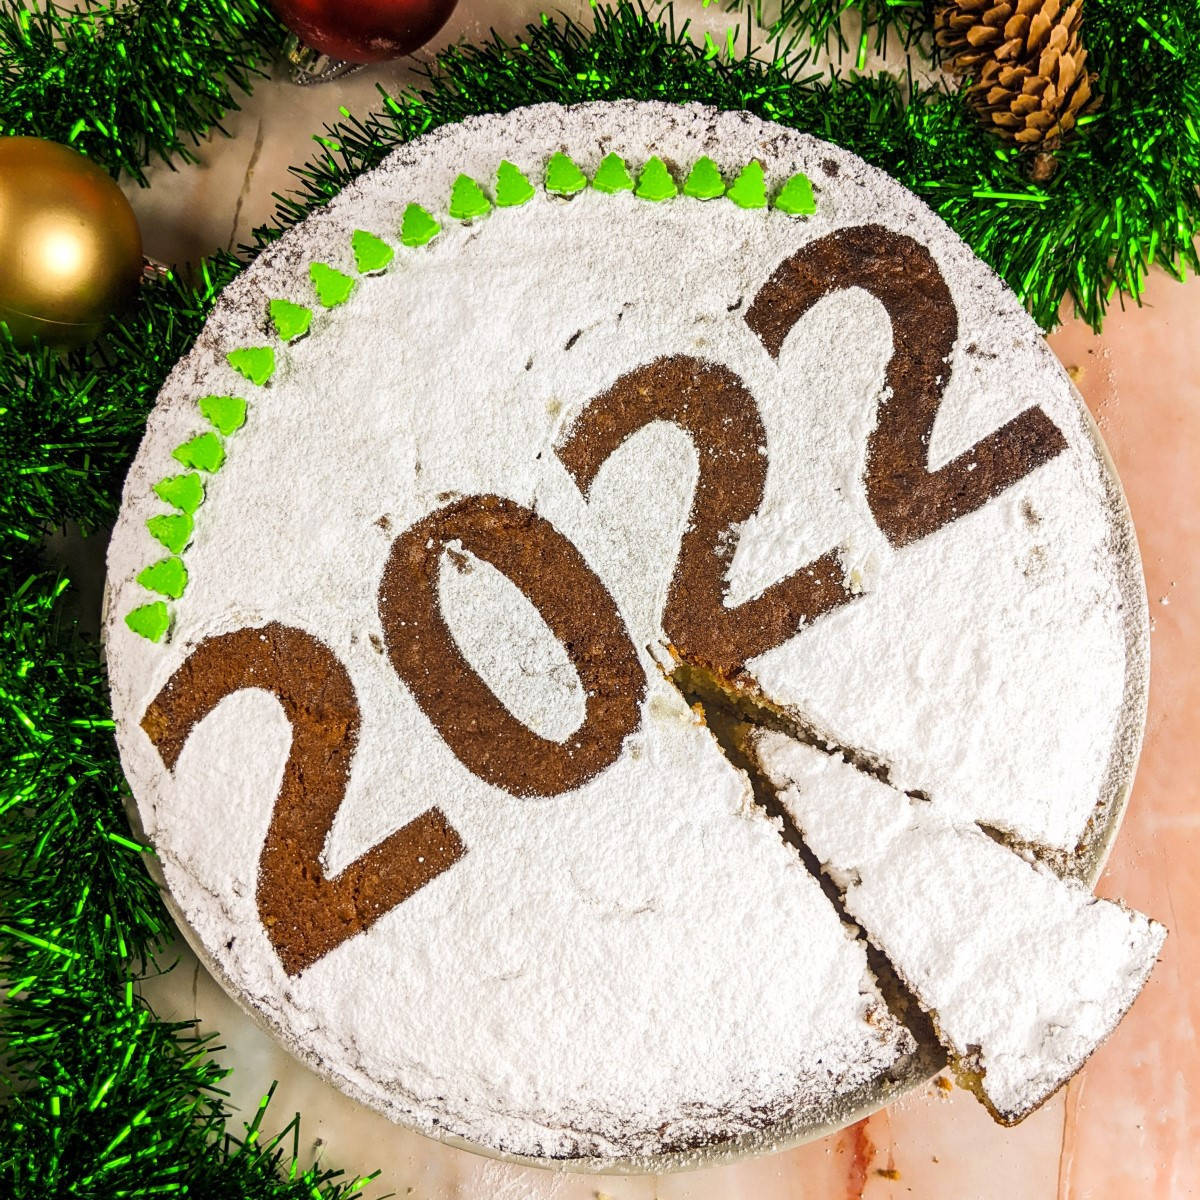 Greek new year cake decorated with powdered sugar and year date and one slice cut and served on a grey plate.